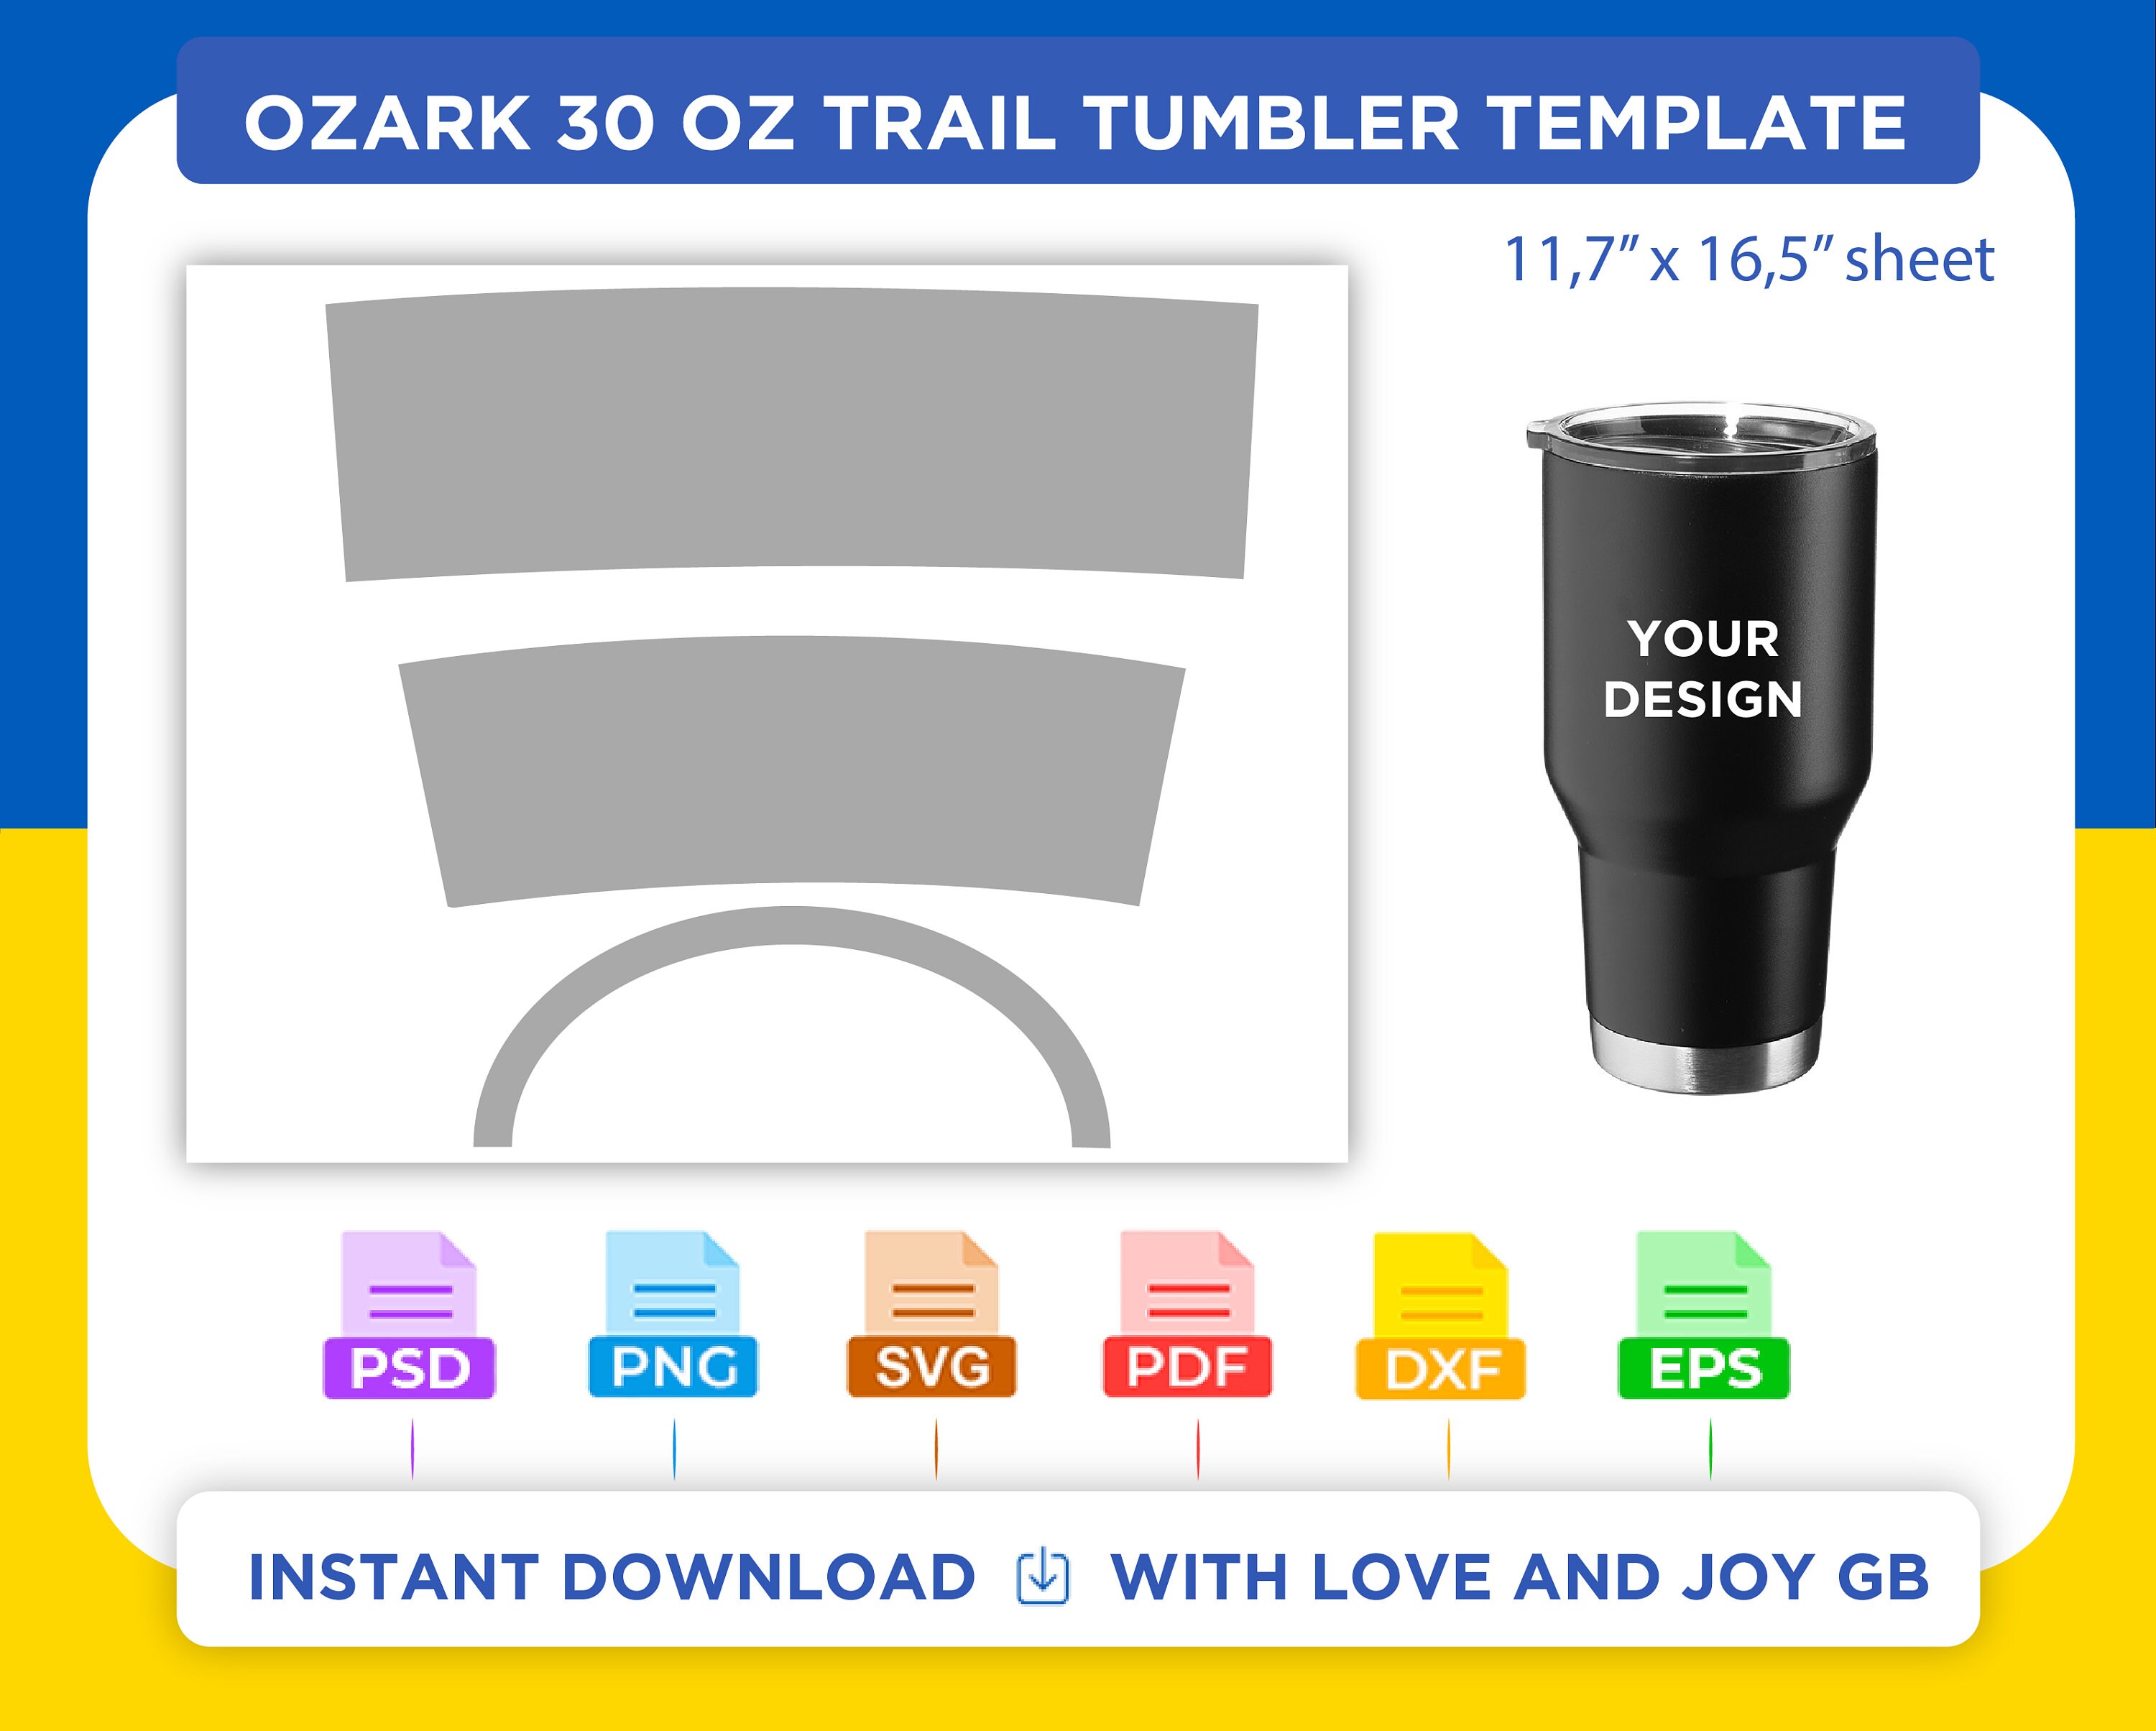 30oz Ozark Trail Tumbler Template Sublimation for Use Silhouette and Cricut  (Instant Download) 